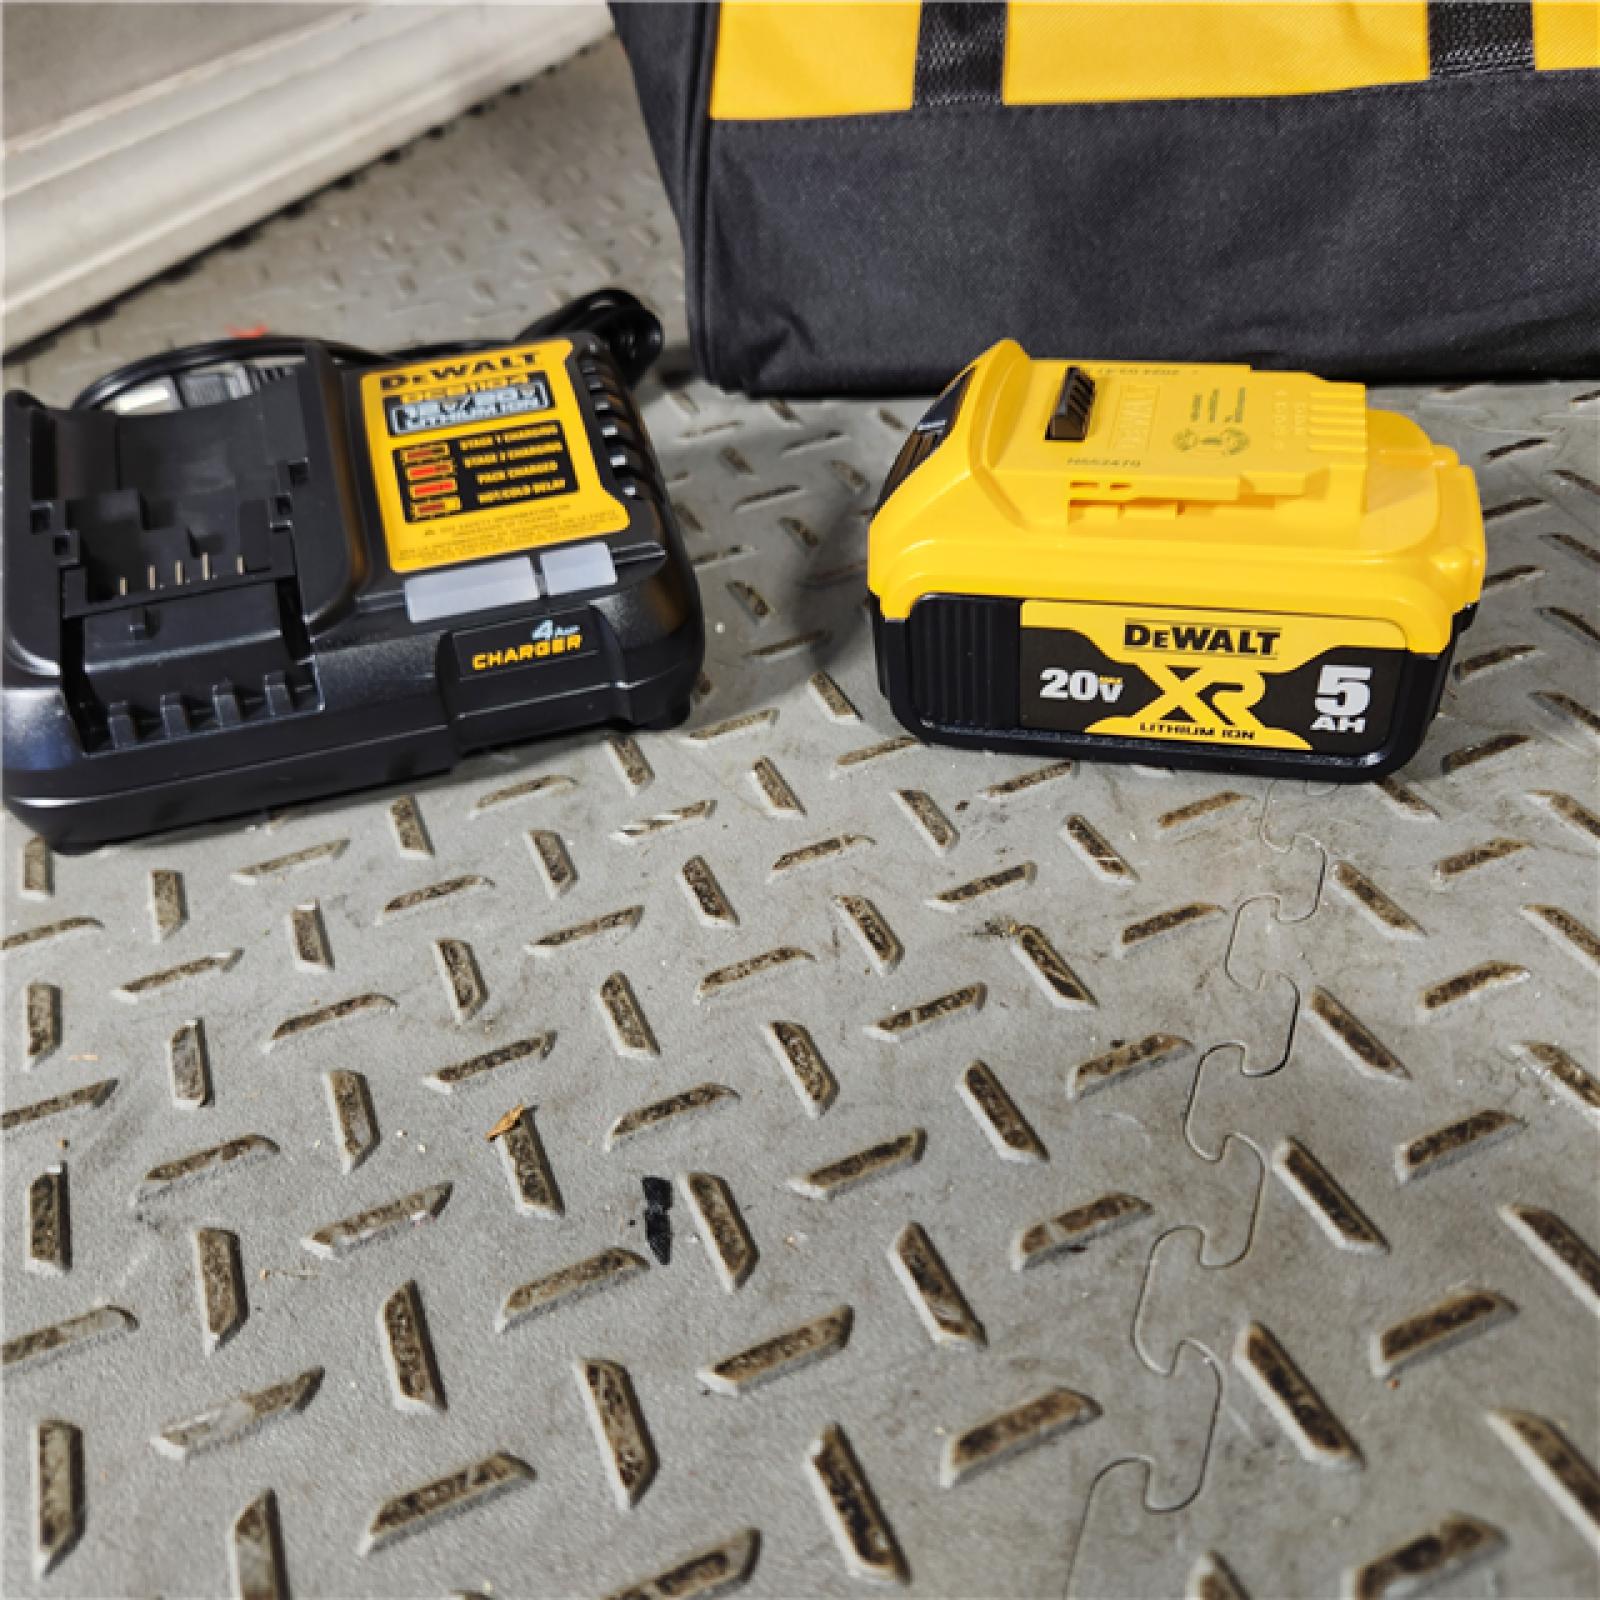 Houston Location - AS-IS DEWALT DCF850P1 ATOMIC 20V MAX Lithium-Ion Brushless Cordless 3-Speed 1/4 Impact Driver Kit 5.0Ah - Appears IN USED  Condition